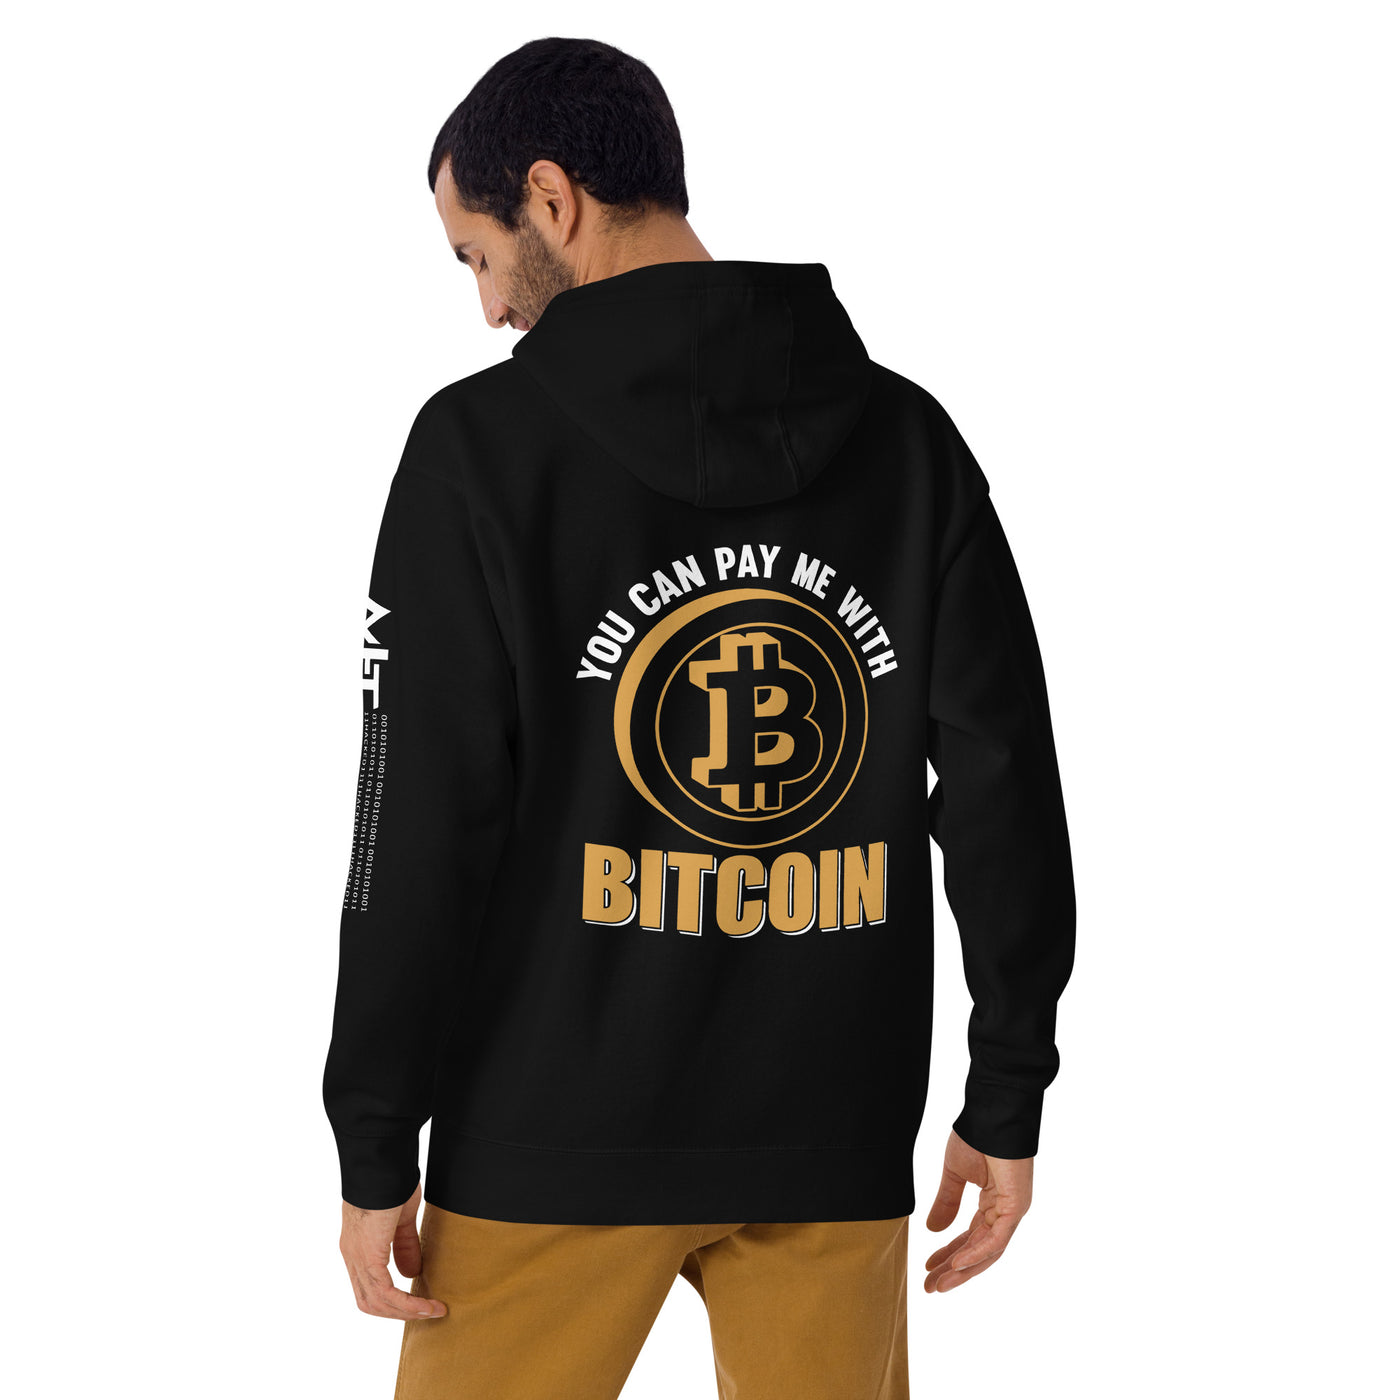 You can Pay me with Bitcoin Unisex Hoodie